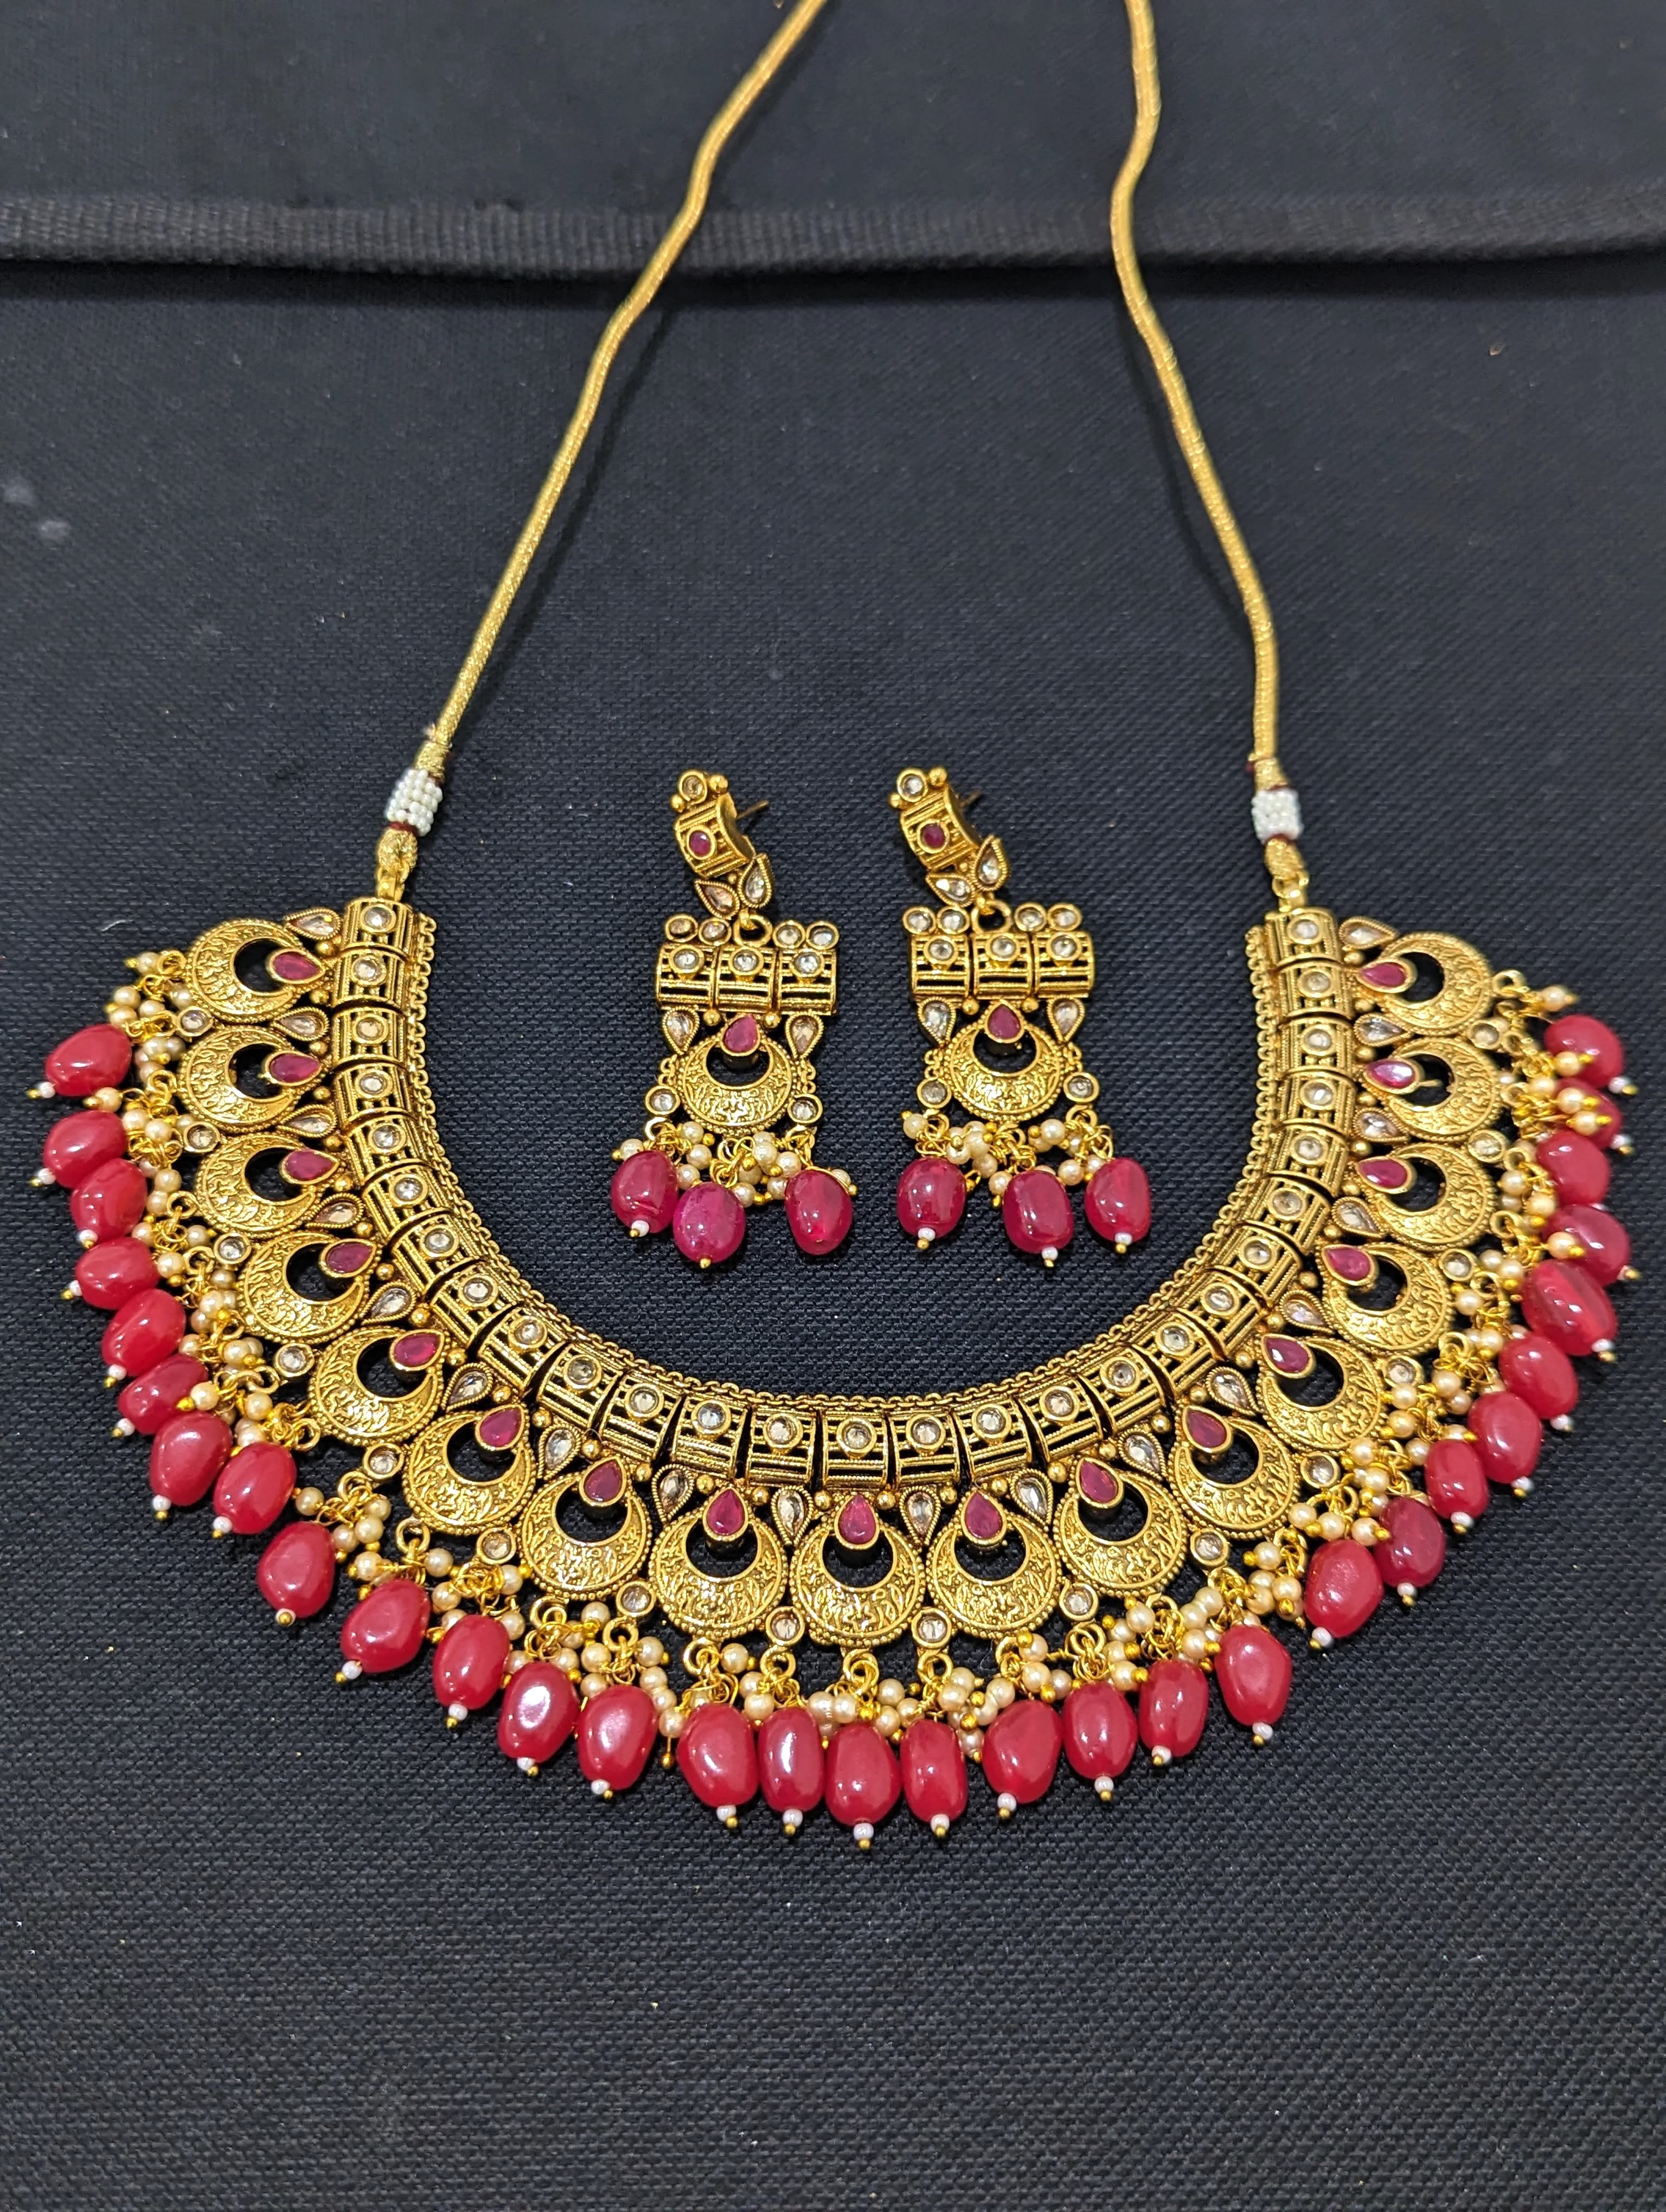 Gold Choker Necklace Kemp Necklace Ruby Necklace Temple Jewelry South  Indian Jewellery Set Indian Jewelry Bridal Jewelry - Etsy